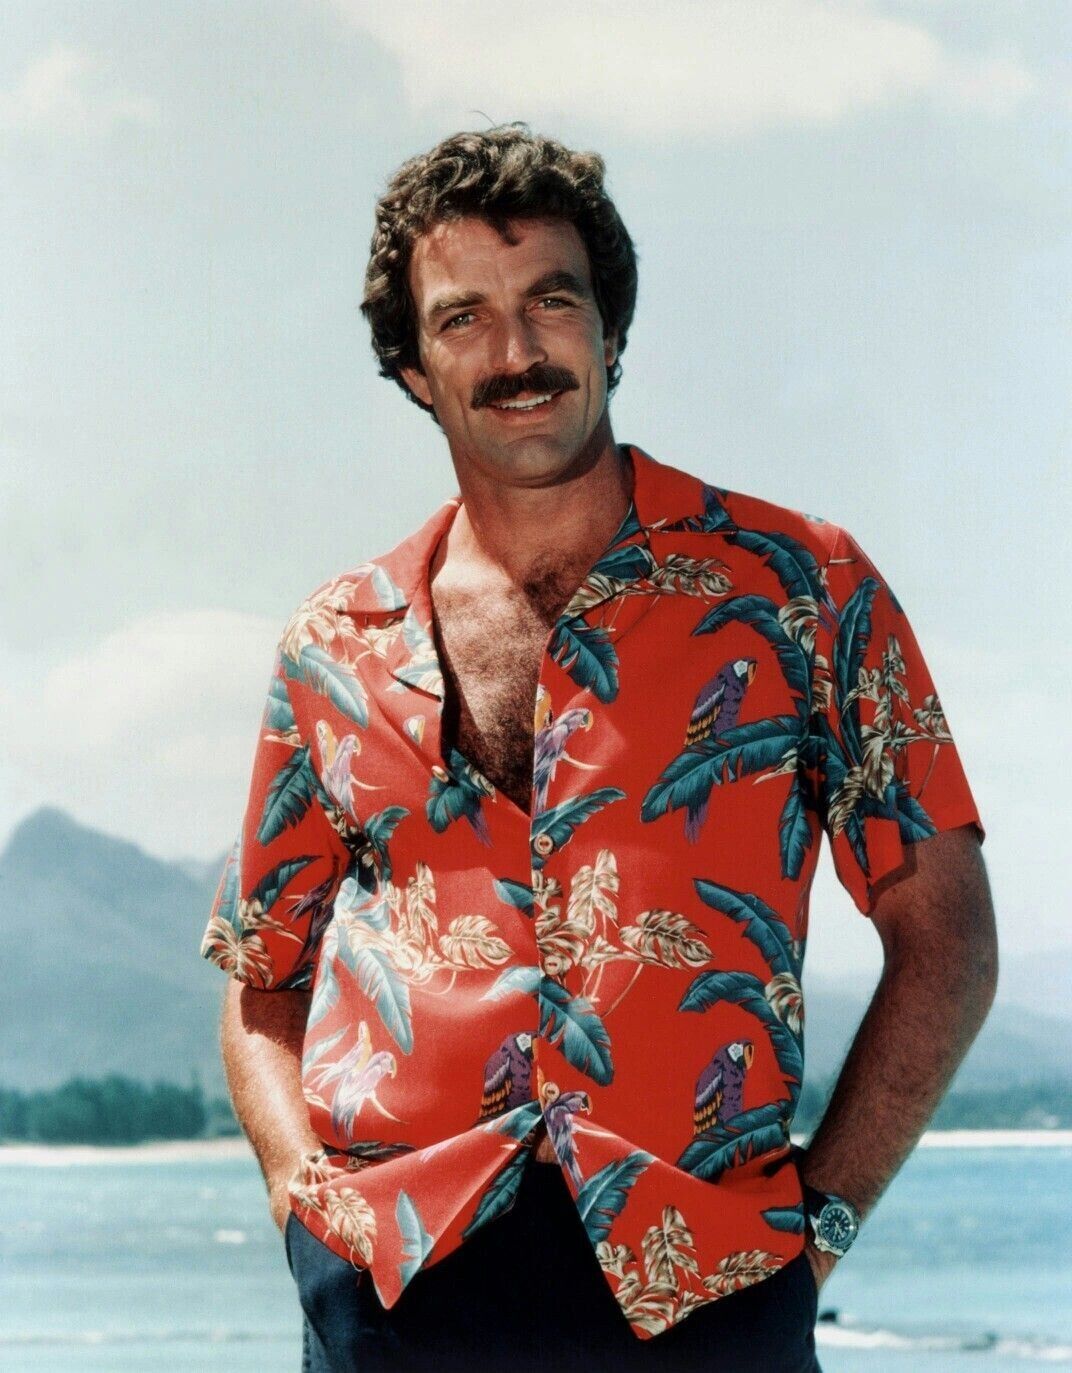 Actor Tom Selleck in TV Show Magnum P.I. Publicity Picture Poster Photo 13x19